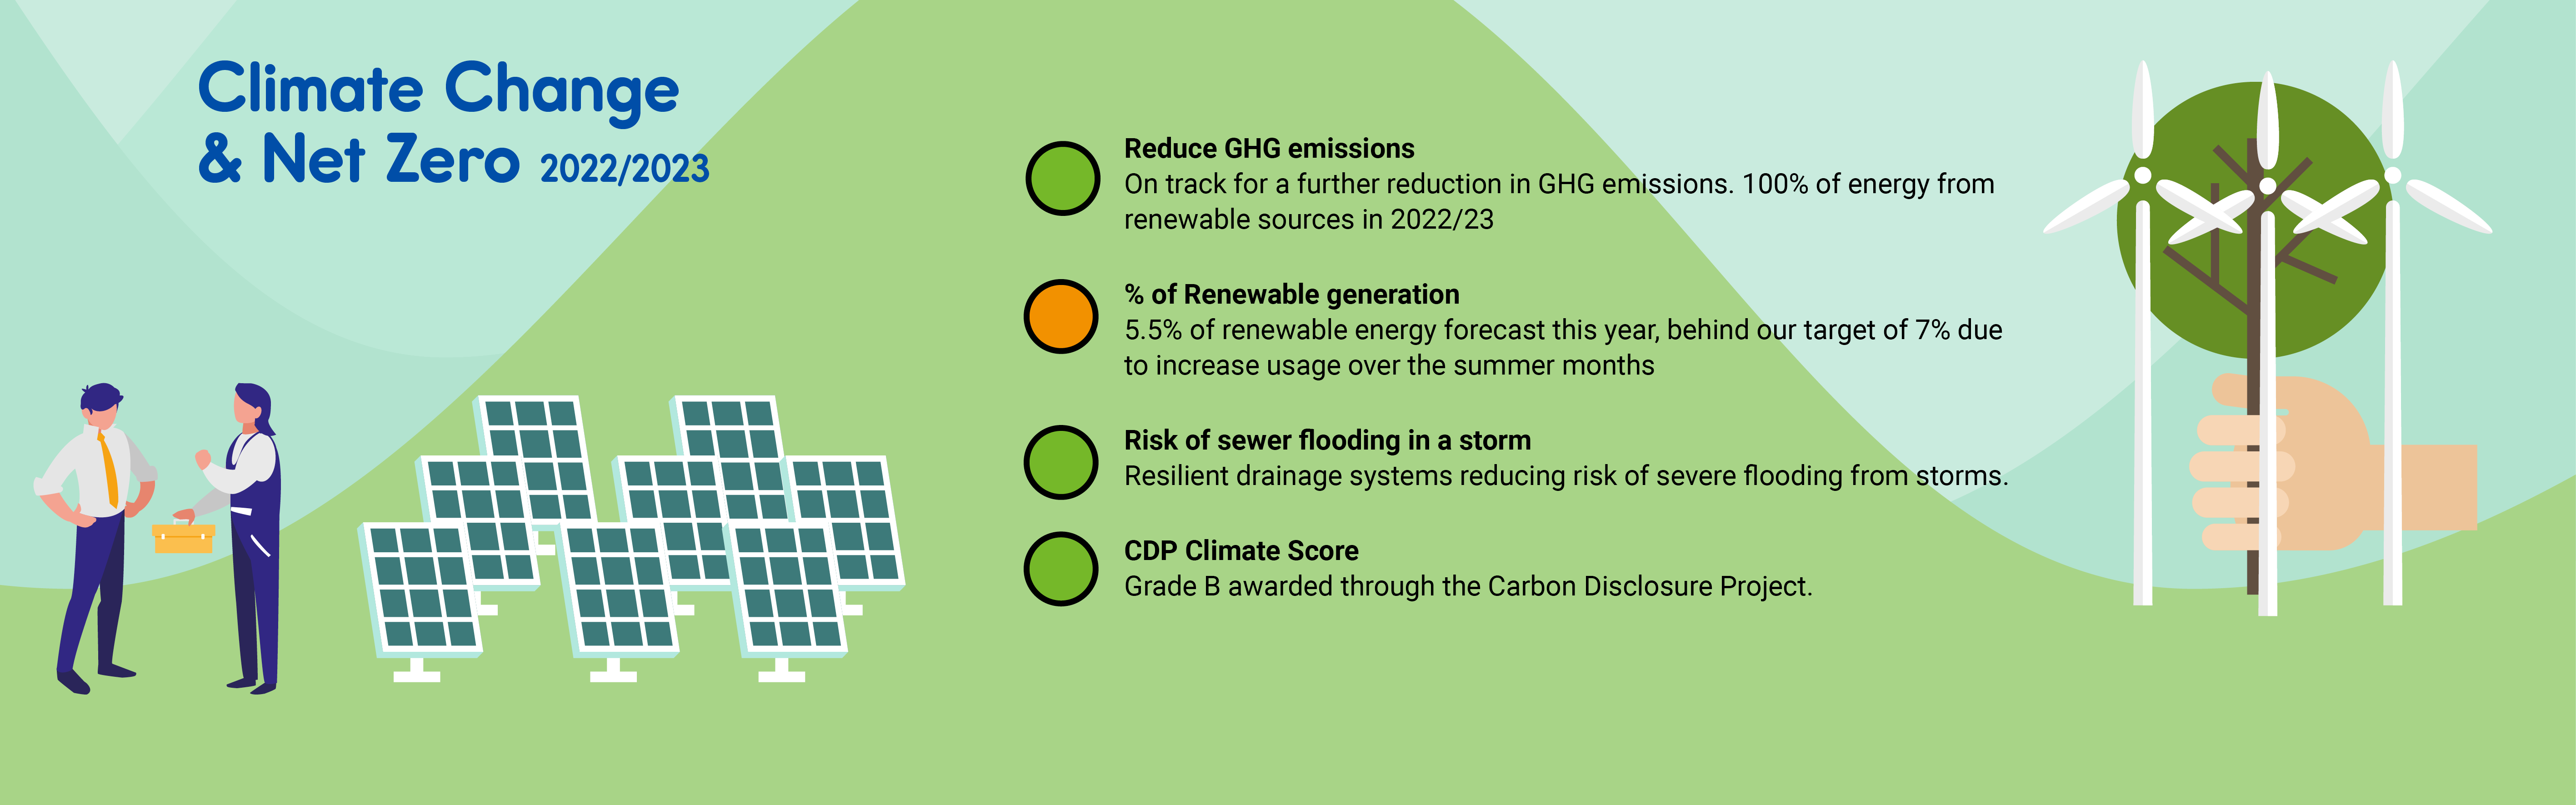 AB22-J10563_SWW_EP Infographic_v06_Section3_Climate Change.png